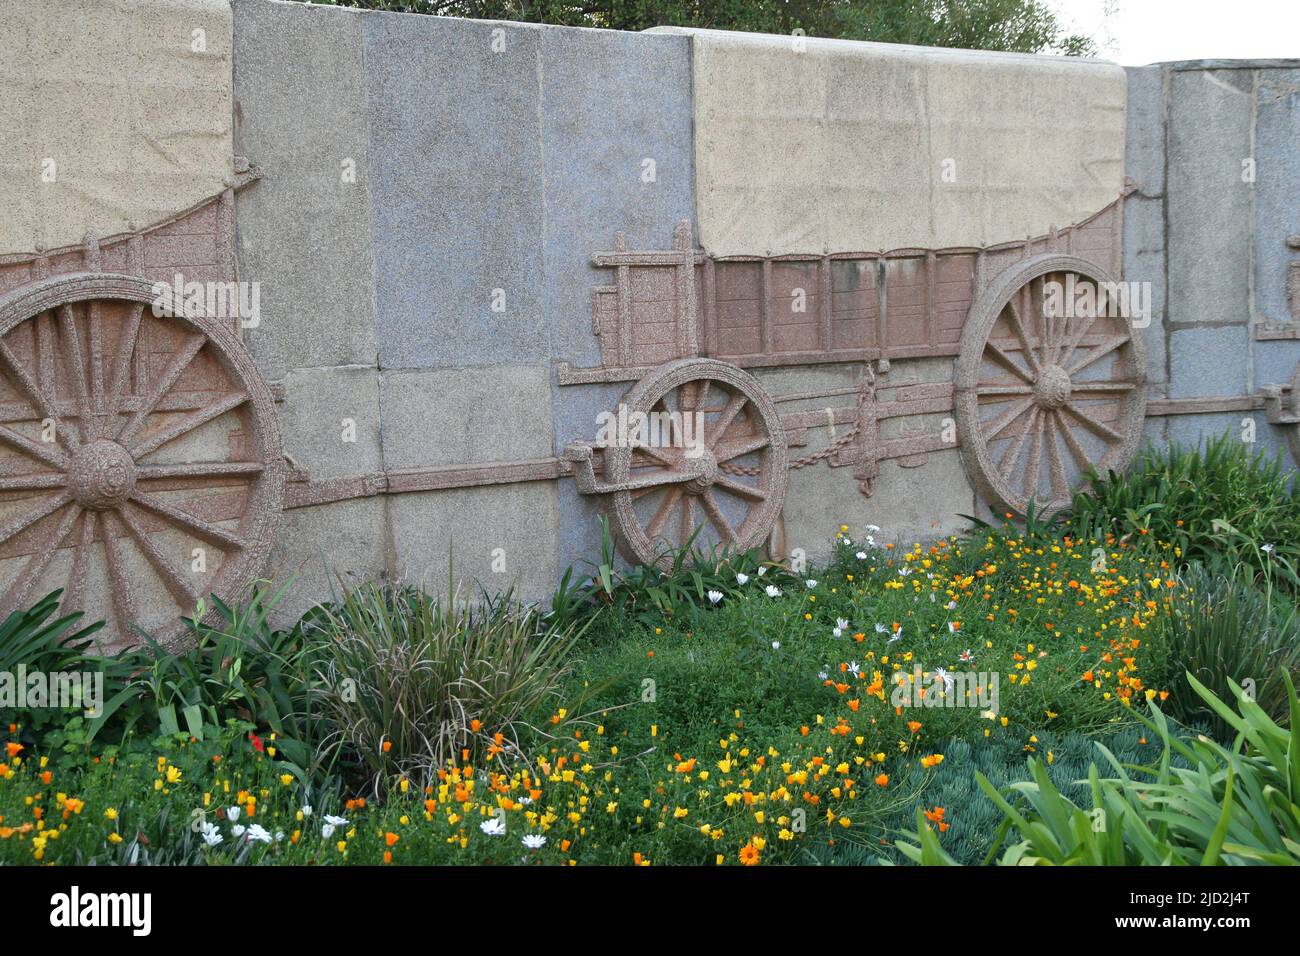 Namaqualand daisies with ox cart reliefs on wall, Voortrekker Monument Museum, Pretoria/Tshwane, Gauteng, South Africa. Stock Photo